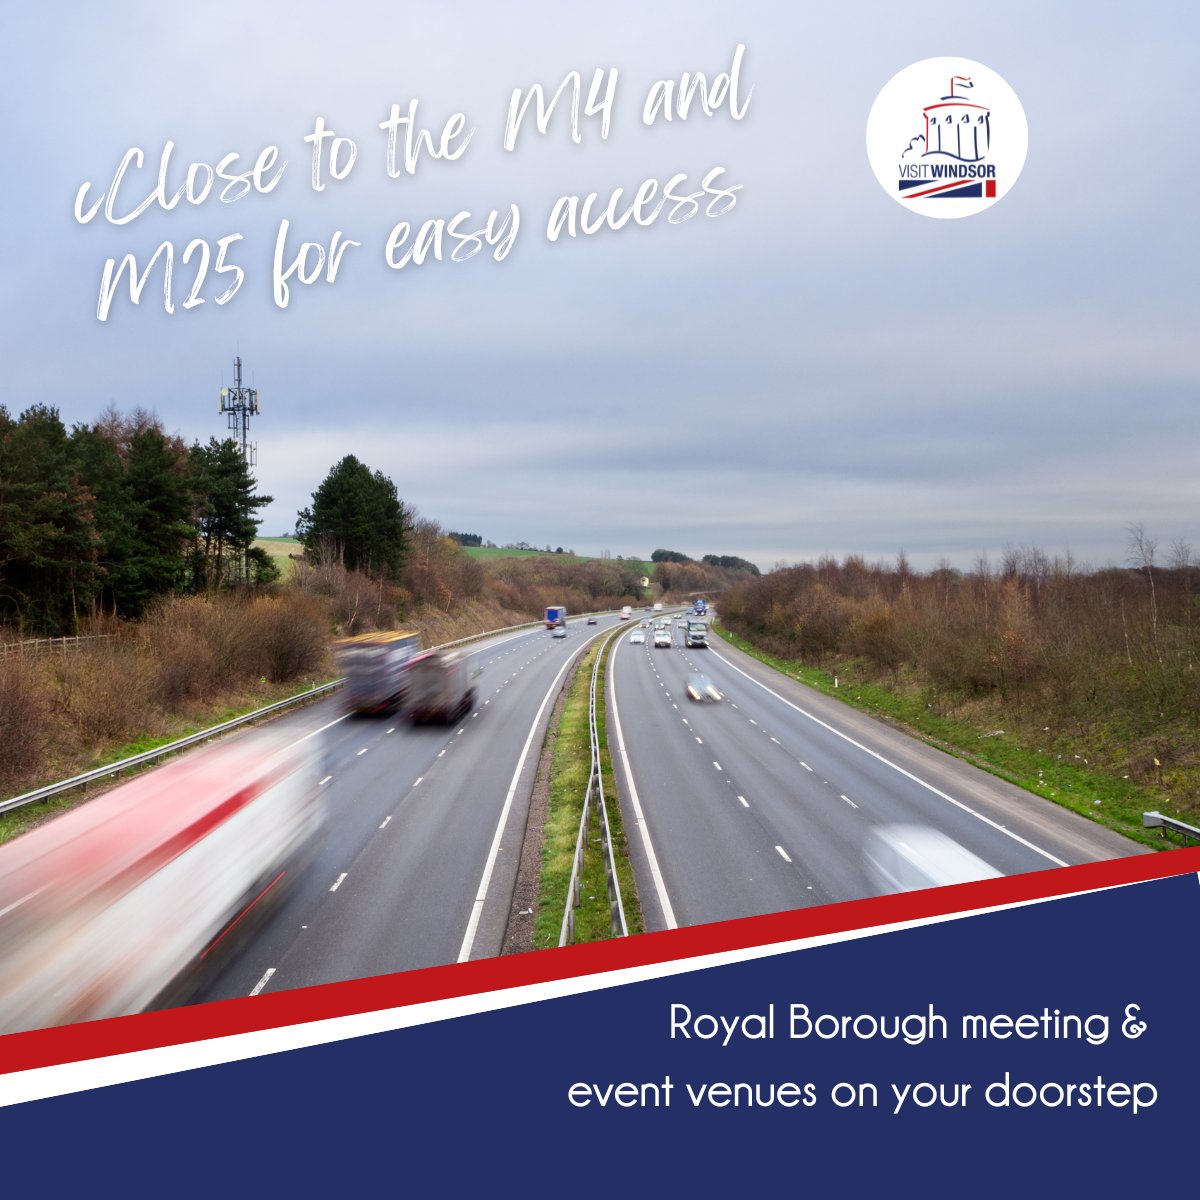 The whole of the Royal Borough is easily accessible via the motorway networks of the M3, M4, M25 and M40 and it’s well served by public transport. Sign up to our e-news for event and conference bookers here: bit.ly/MICEenews
#royalconnections #royalwindsor #eventprofs